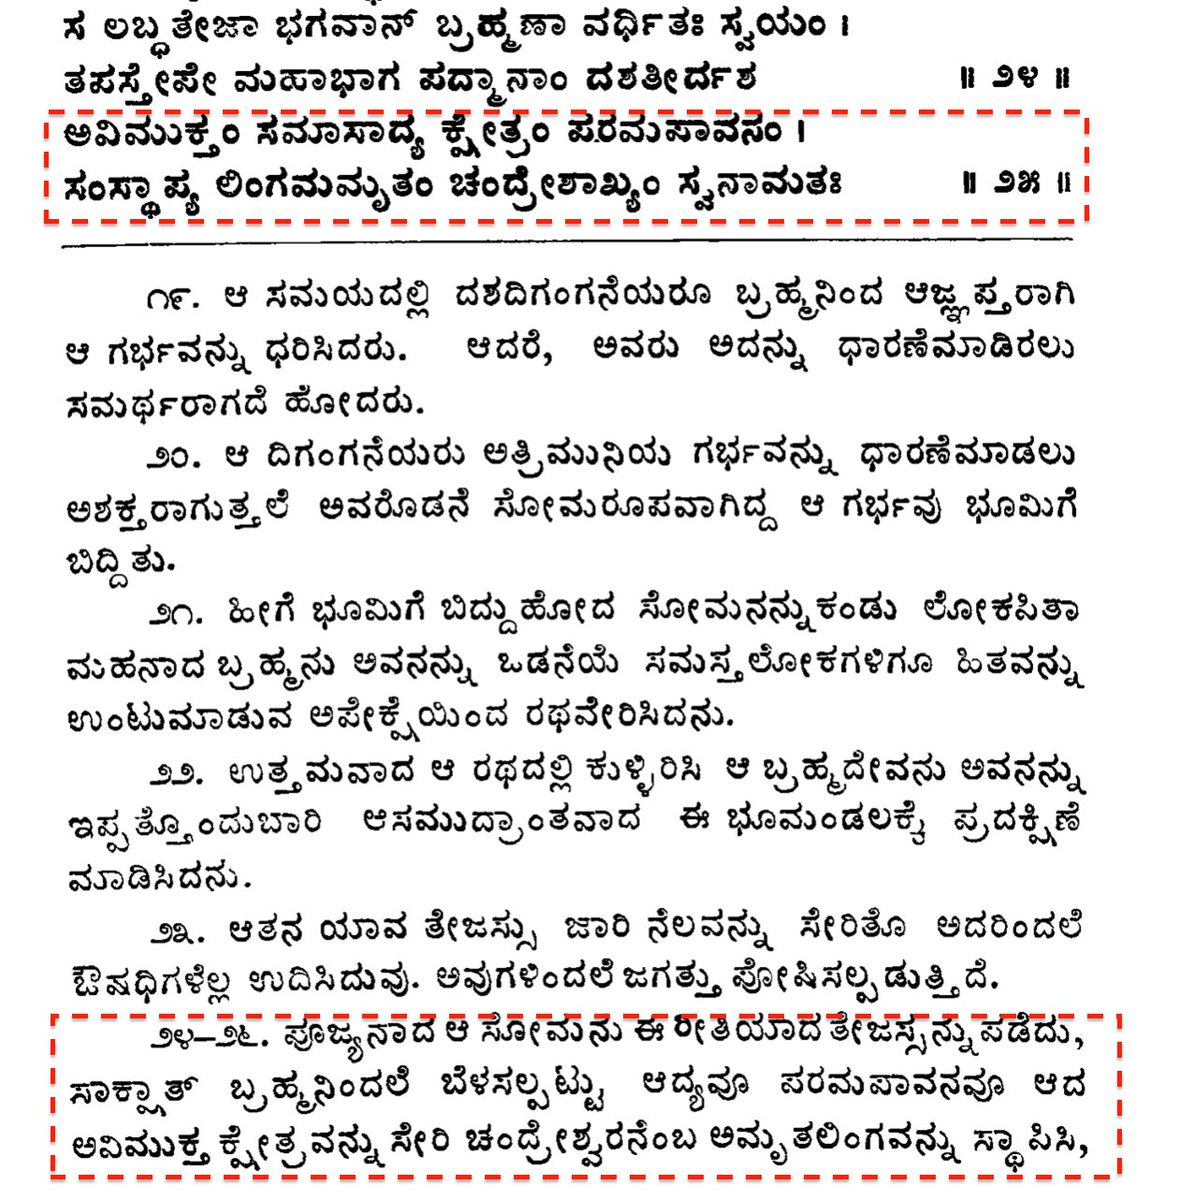 In Skandapurāṇa, Book 4 - Kāśī-khaṇḍa, Section 1 - Pūrvārdha, Chapter 14 has description of Sōmaoka. In this chapter, there is detail on the birth of Sōma / Chandra and his position among the devatas. Sōma installed a linga, Candrēśvara as below5/